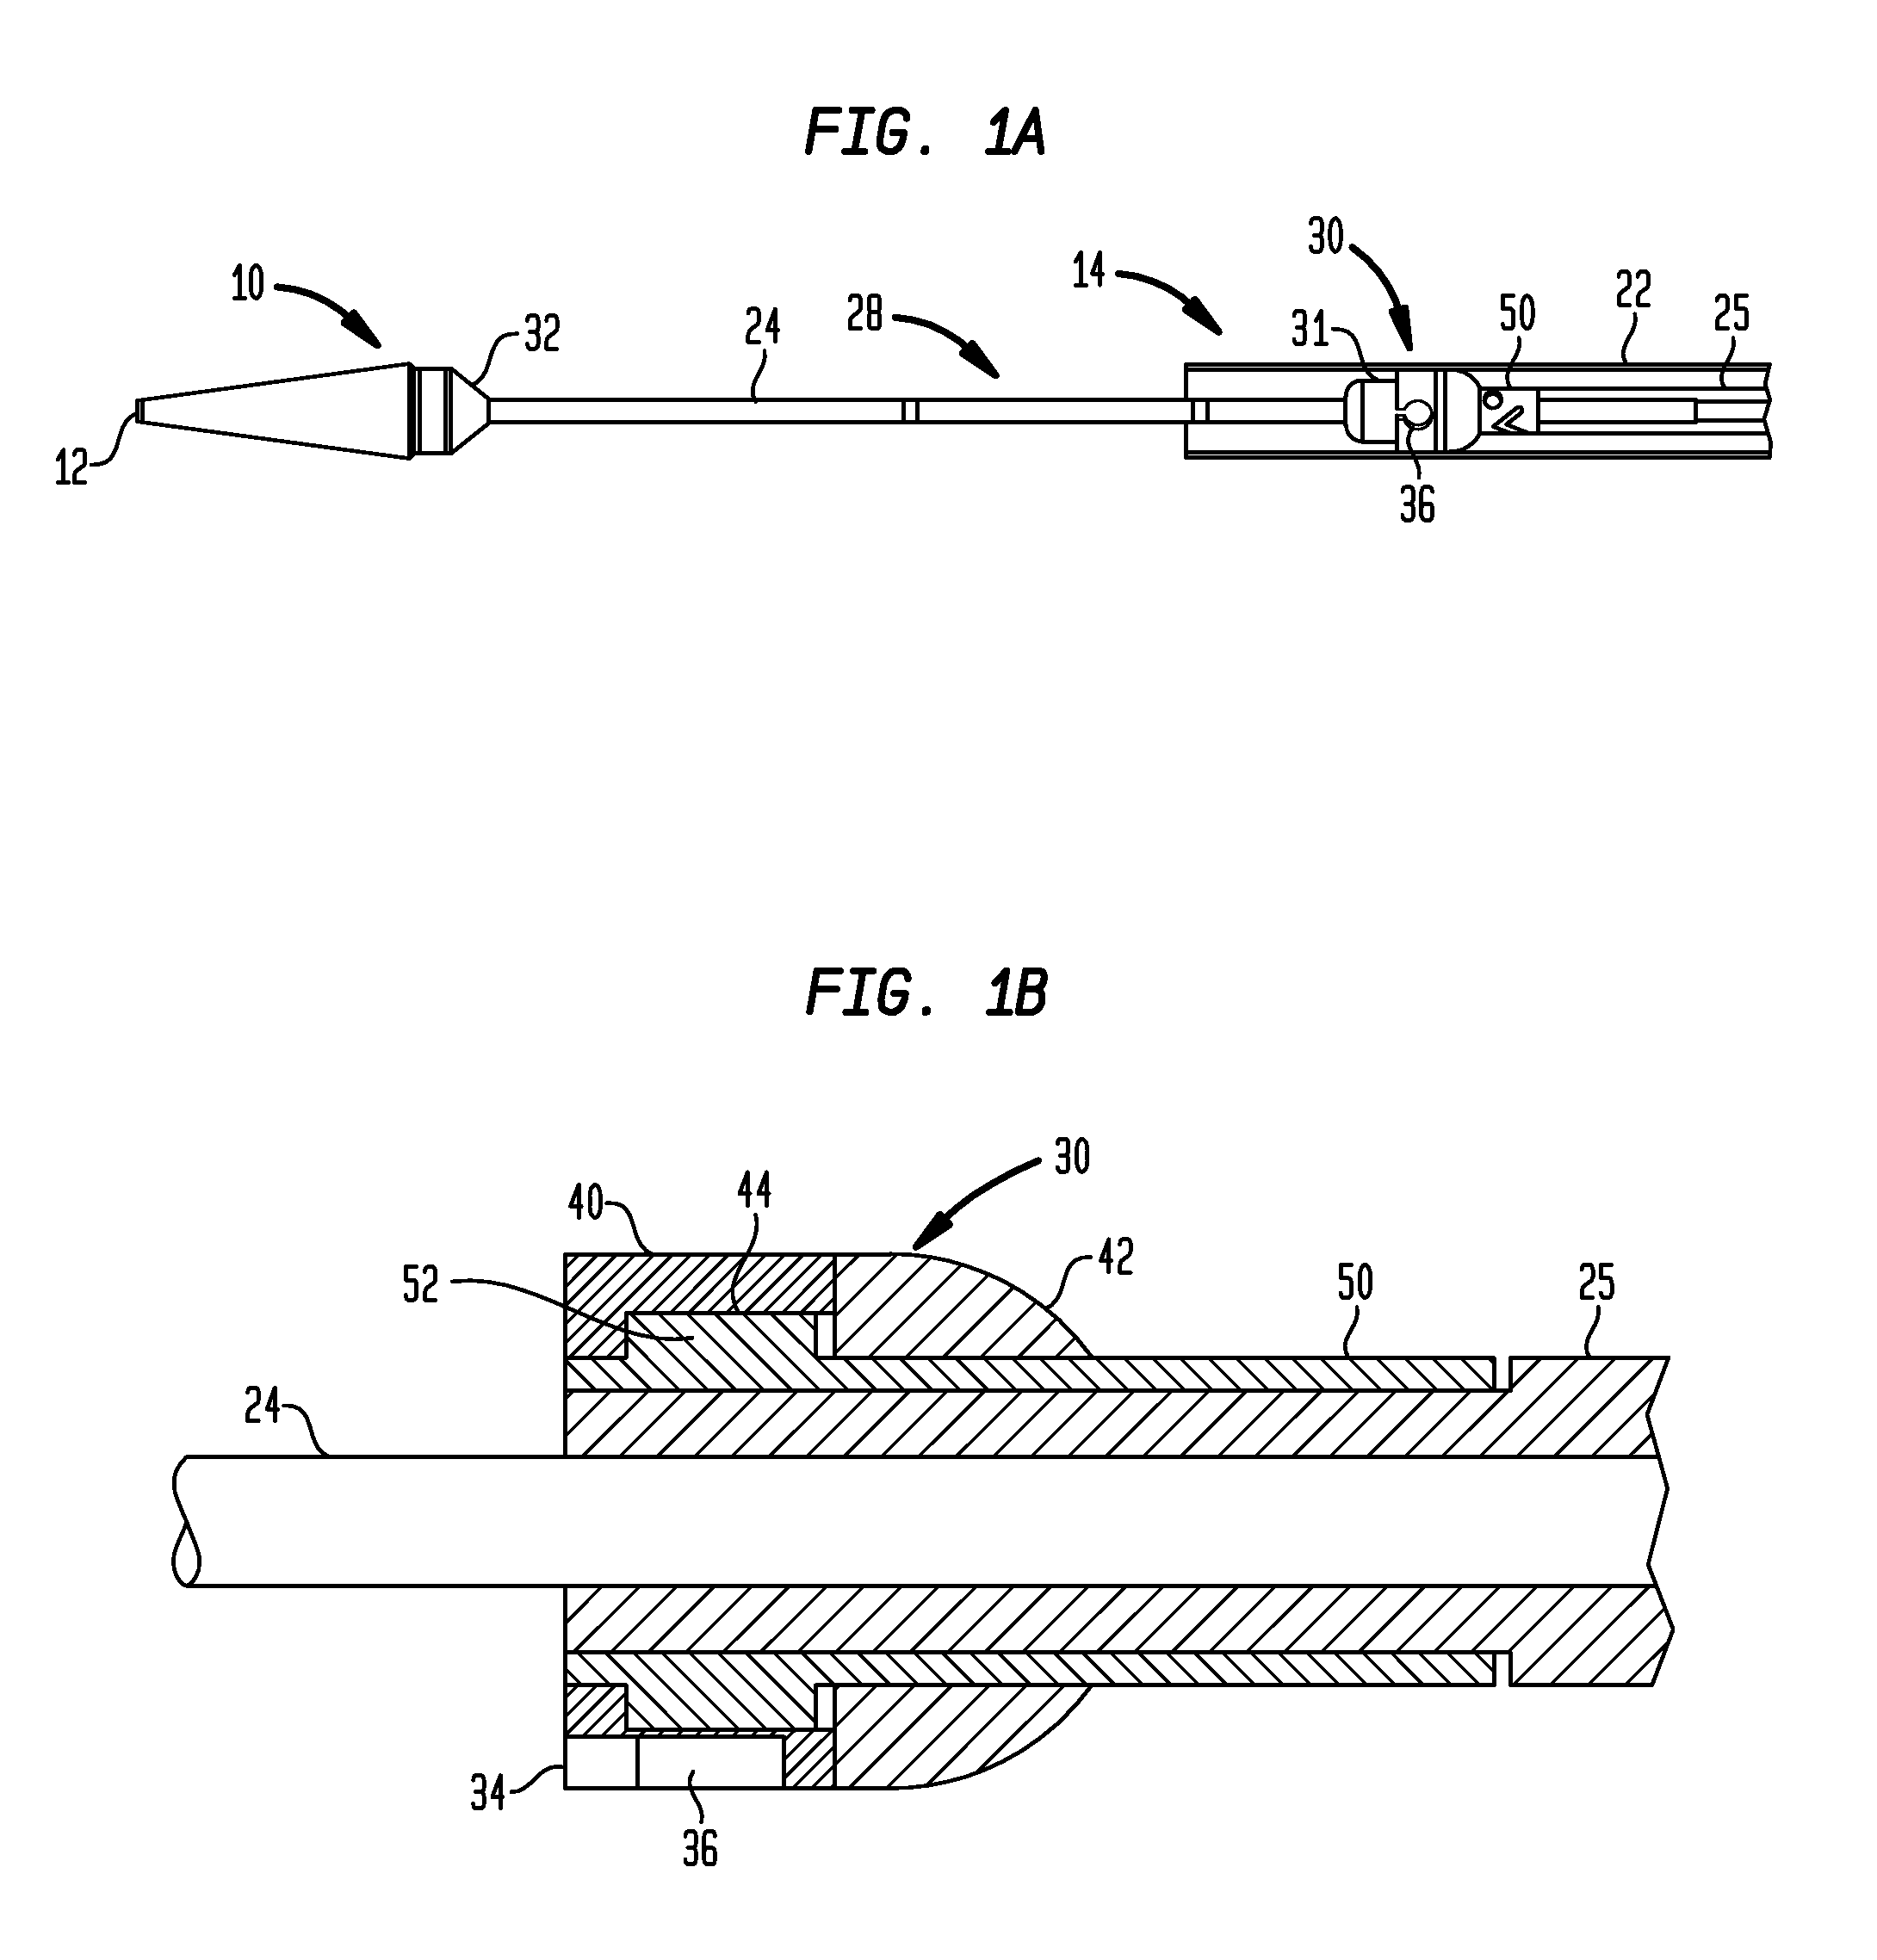 Retainers for transcatheter heart valve delivery systems